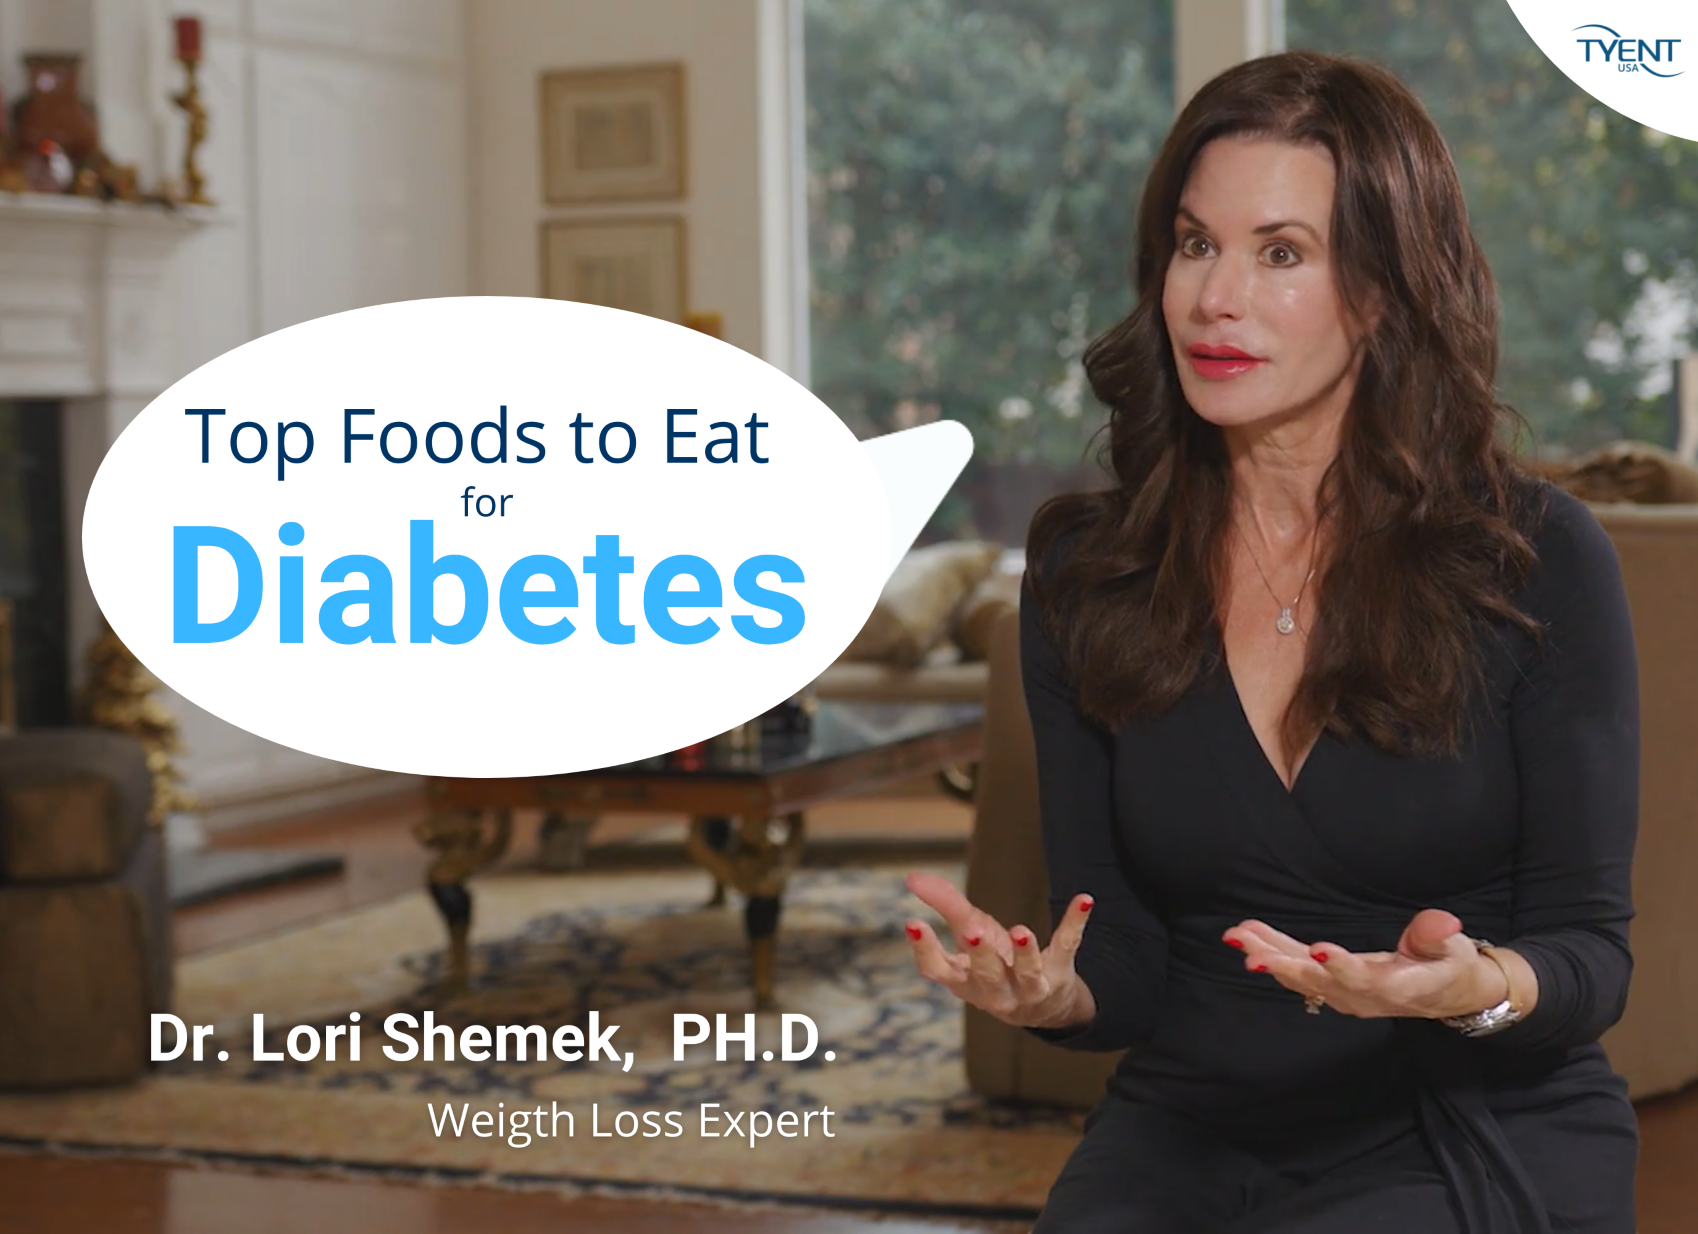 Top Foods to Eat for Diabetes